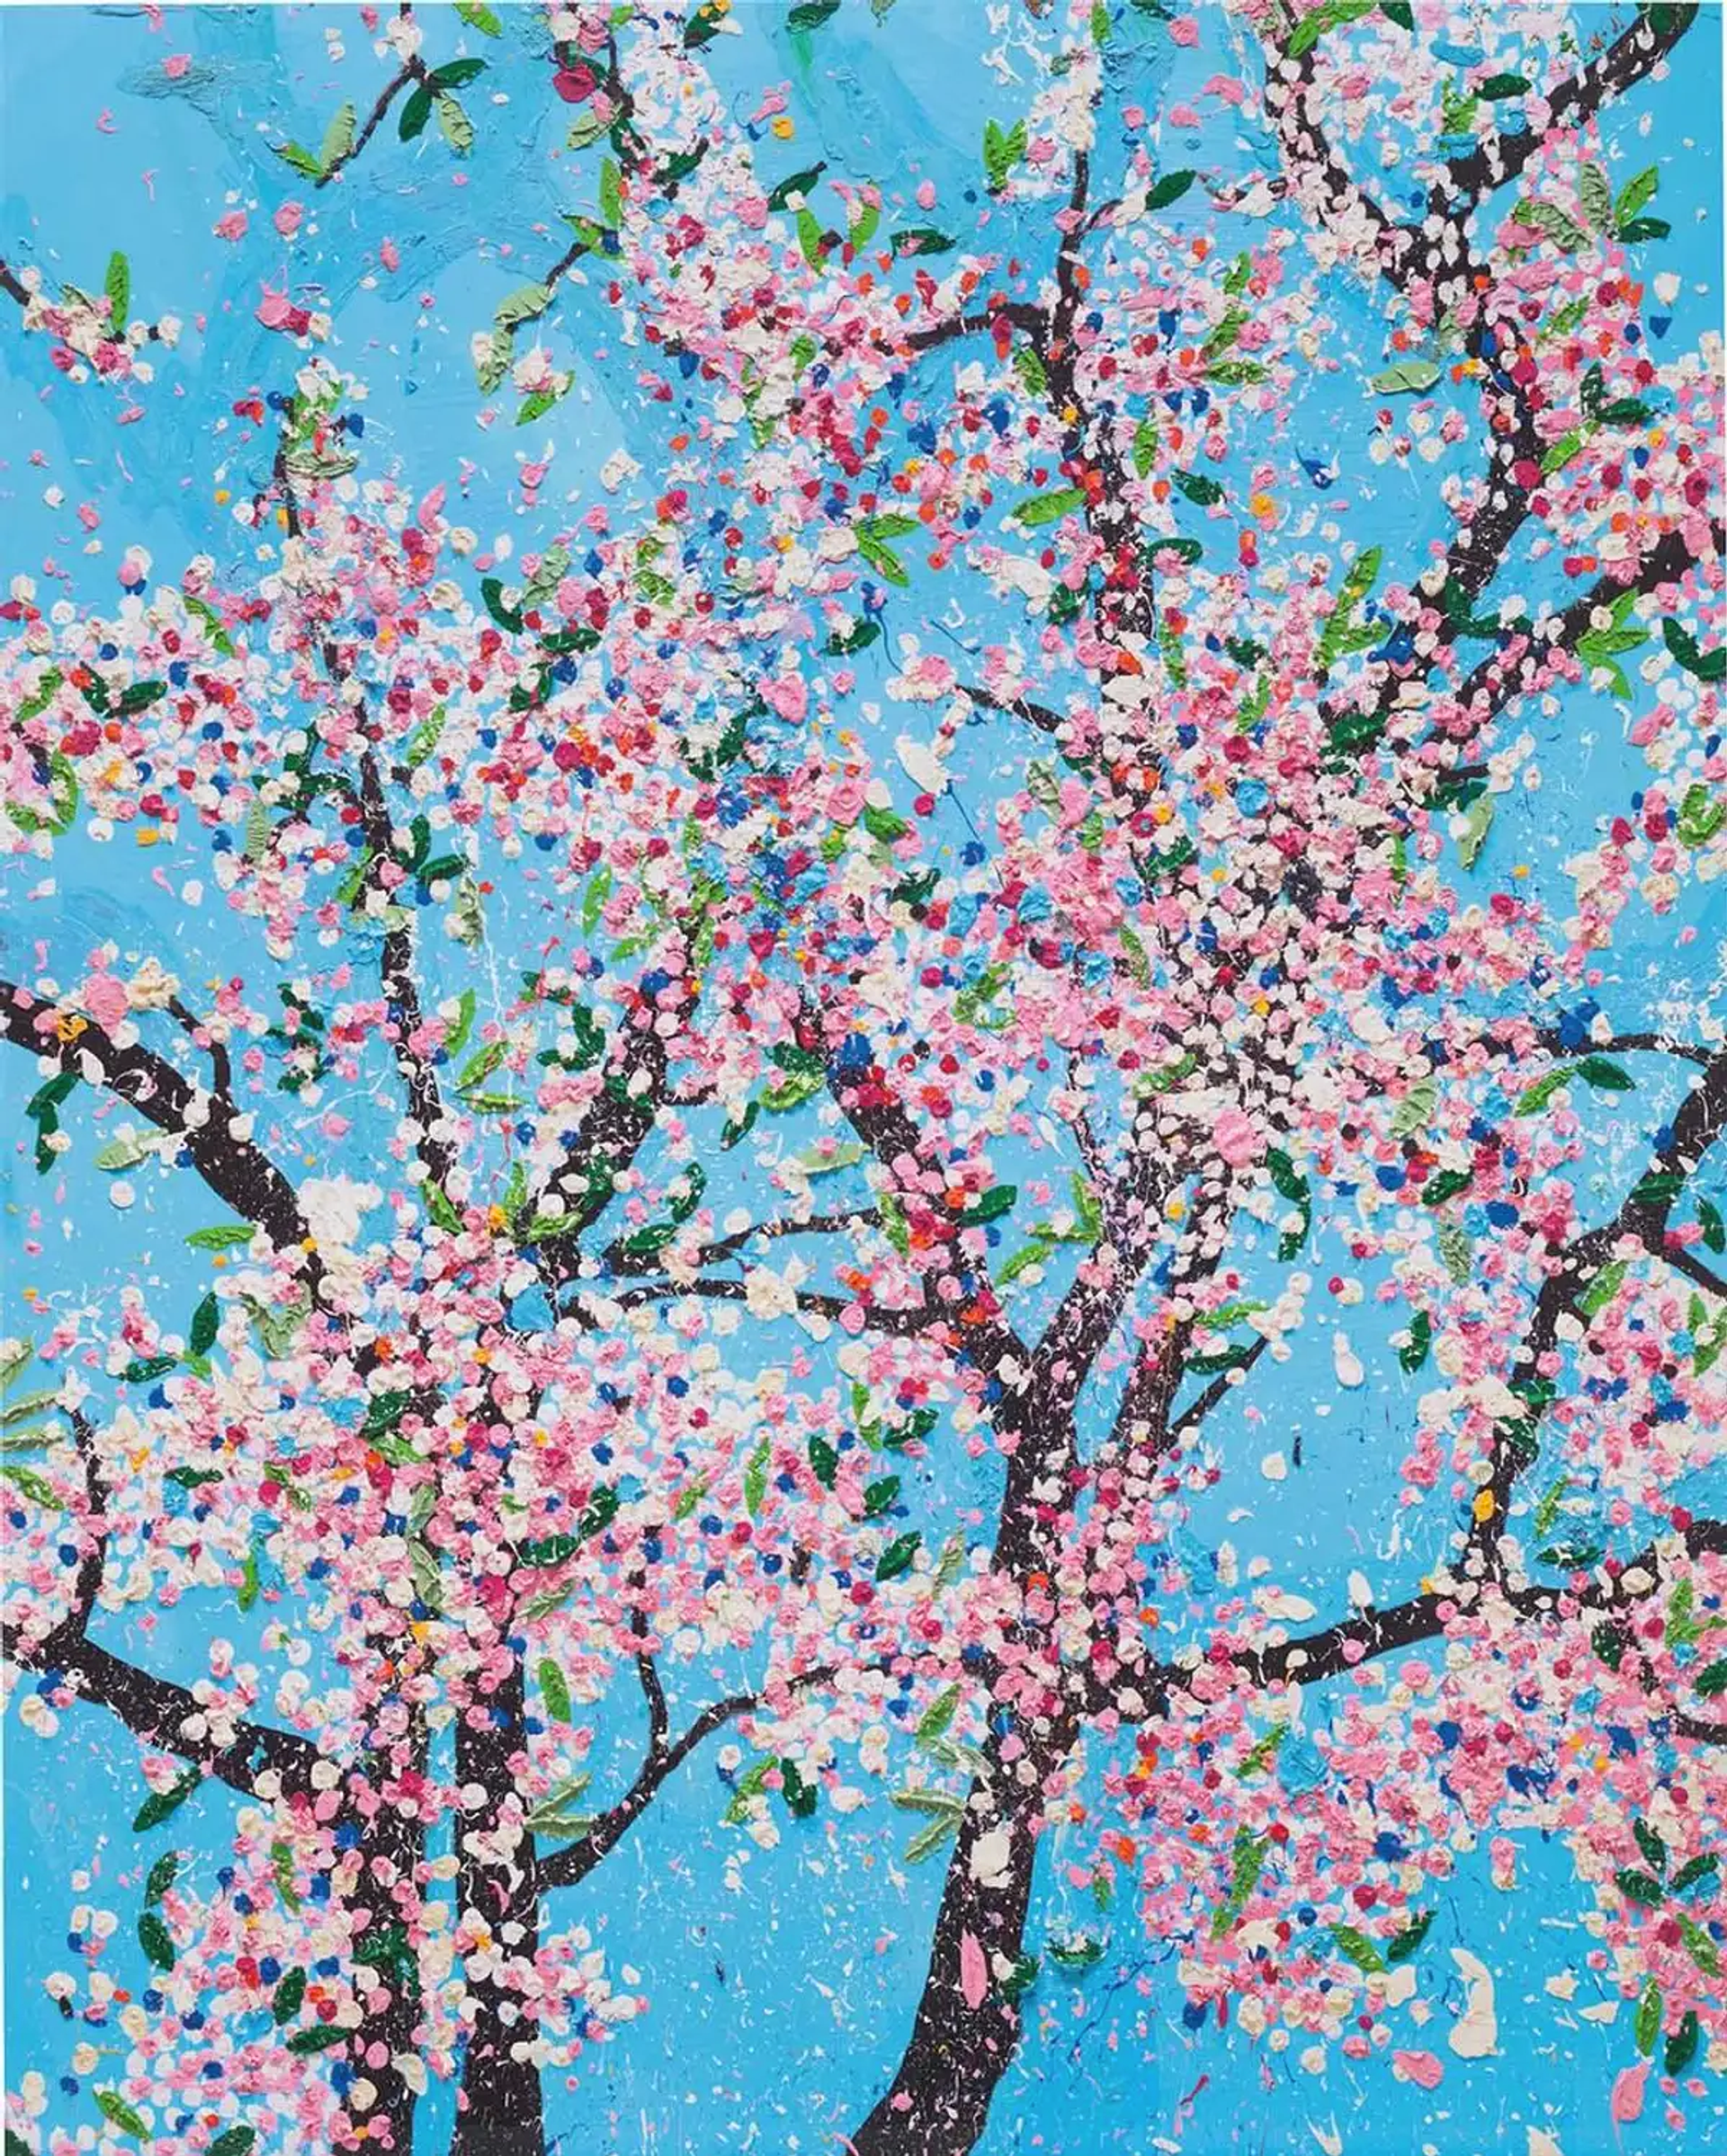 Here, Hirst renders a cherry blossom tree in various shades of pink against a light blue backdrop. The vibrant, pastel colours evoke the season of Spring, bringing a cheerful and upbeat tone to the print. The cherry blossom tree is depicted with a combination of thick brushstrokes, intricate spots and delicate gestural lines.